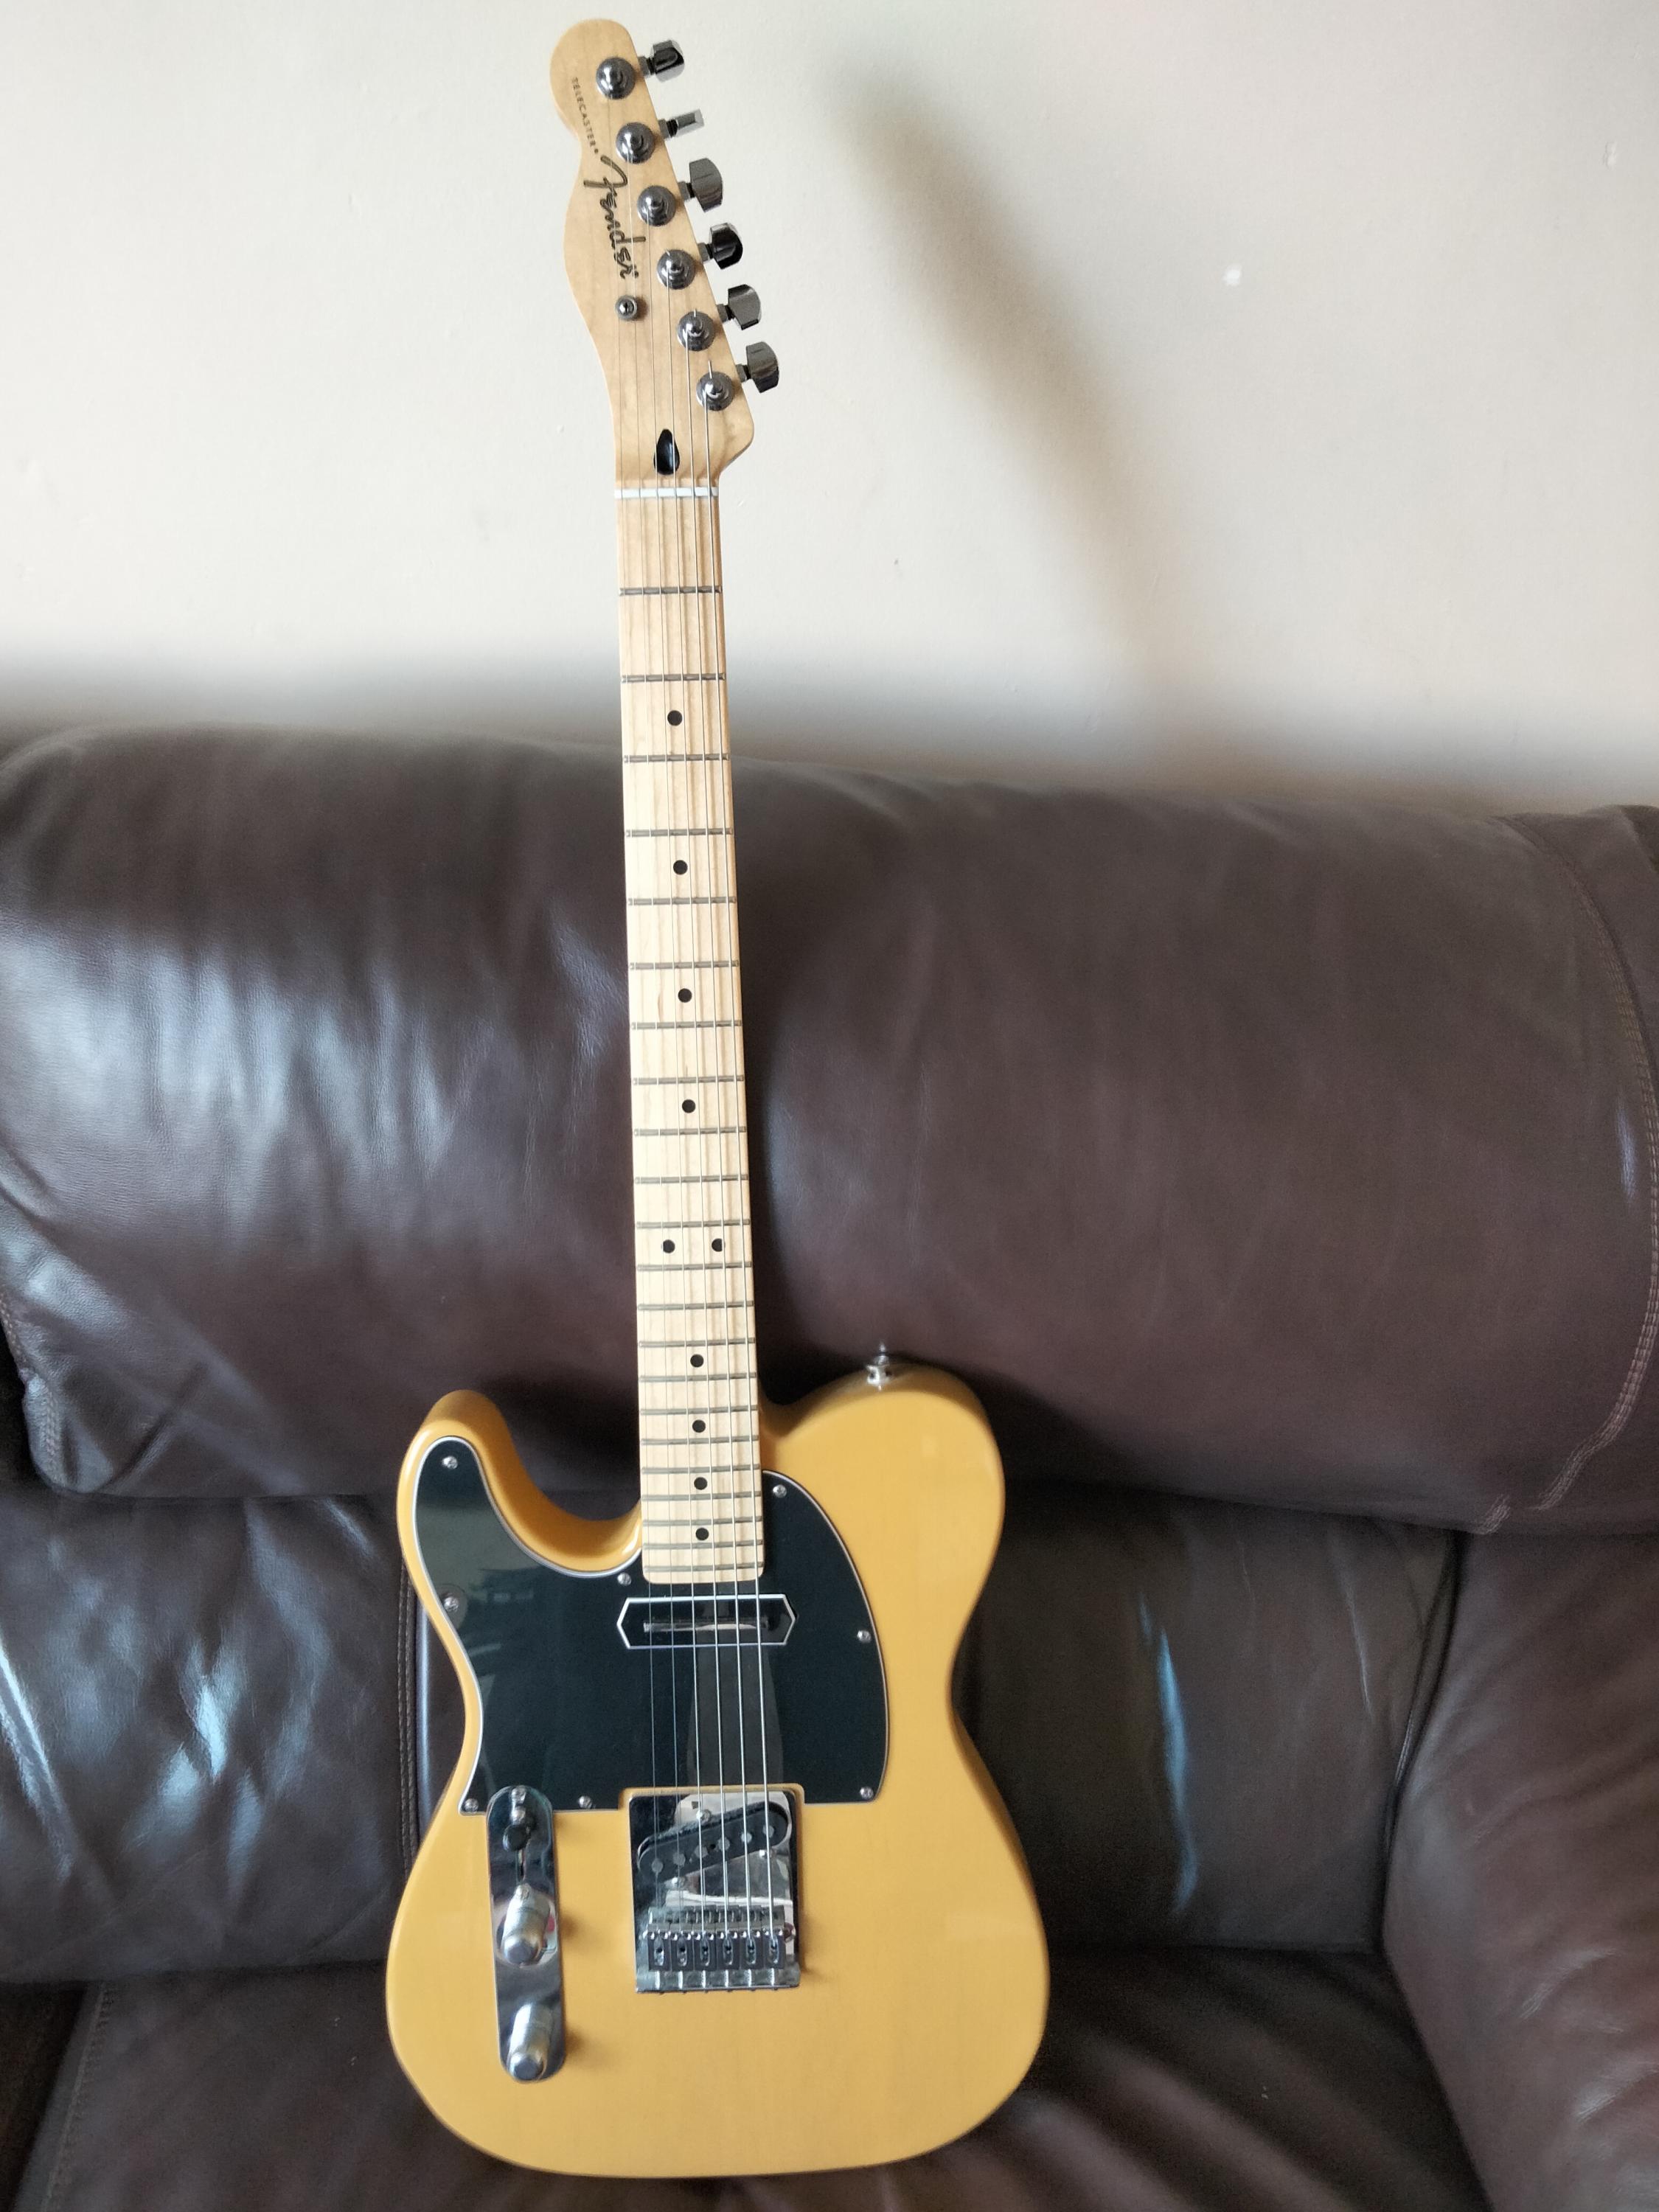 Telecaster Love Thread, No Archtops Allowed-img20220331153056-jpg